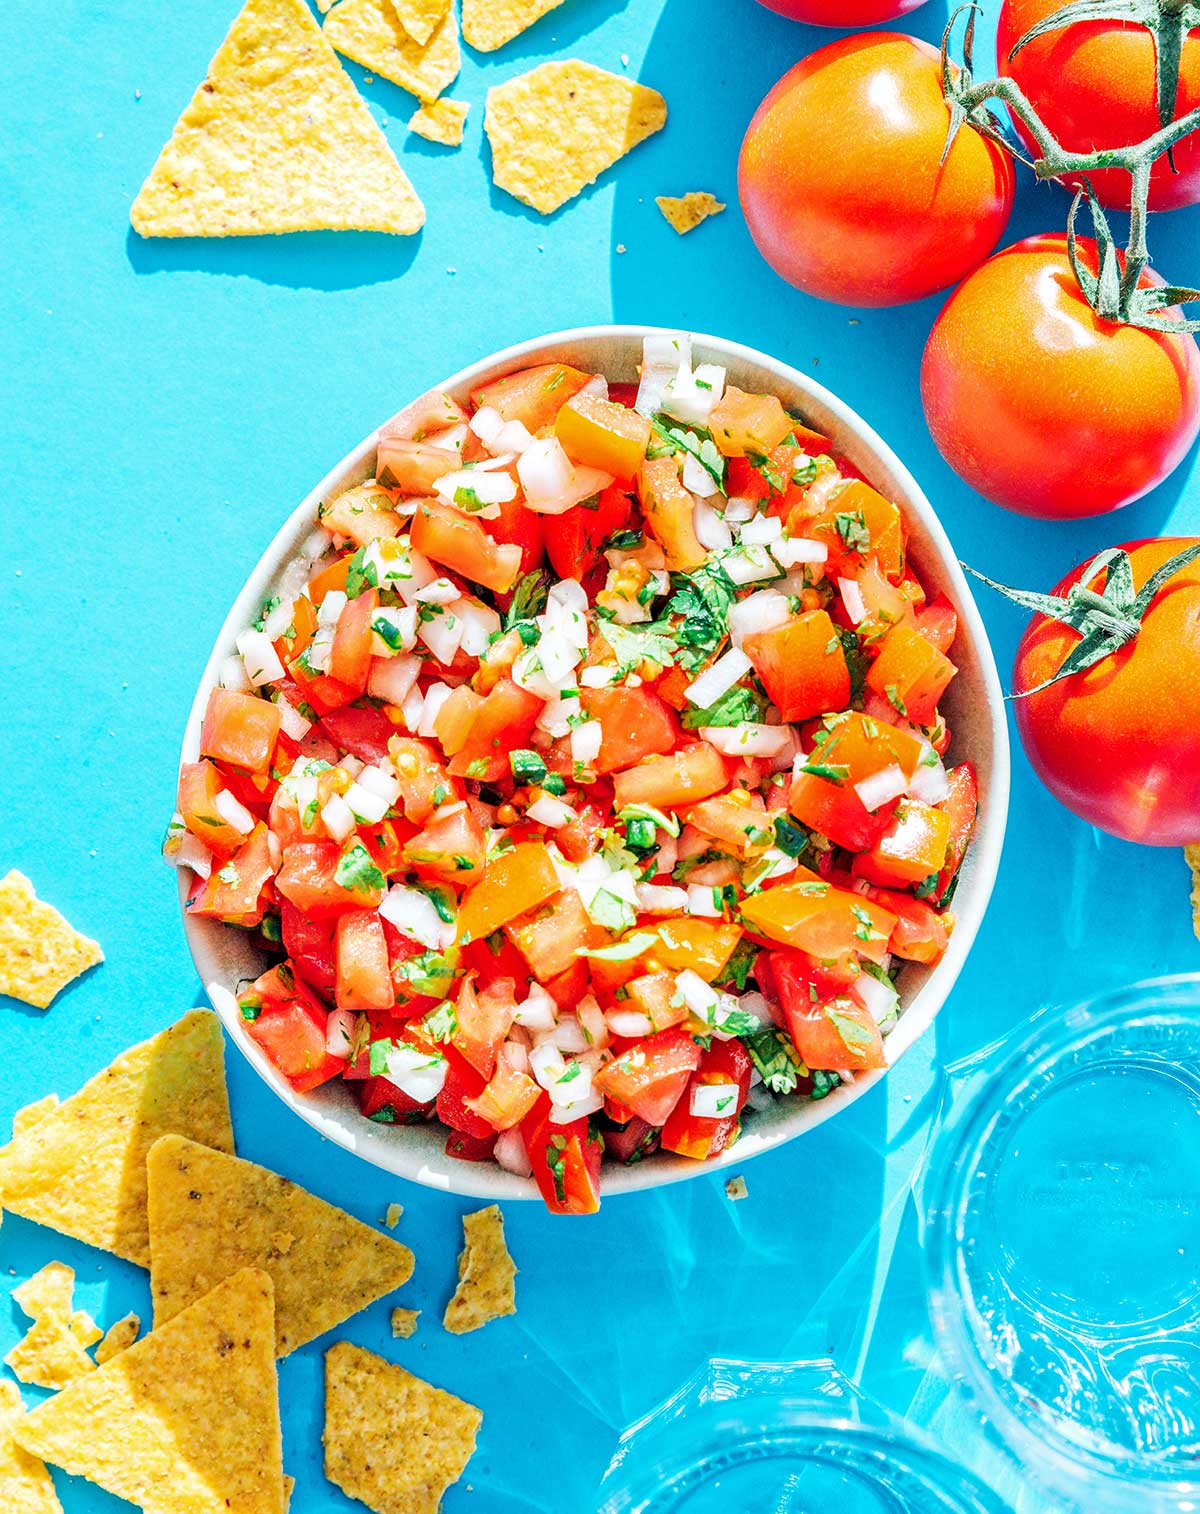 Pico de gallo in a white bowl with chips and tomatoes scattered around